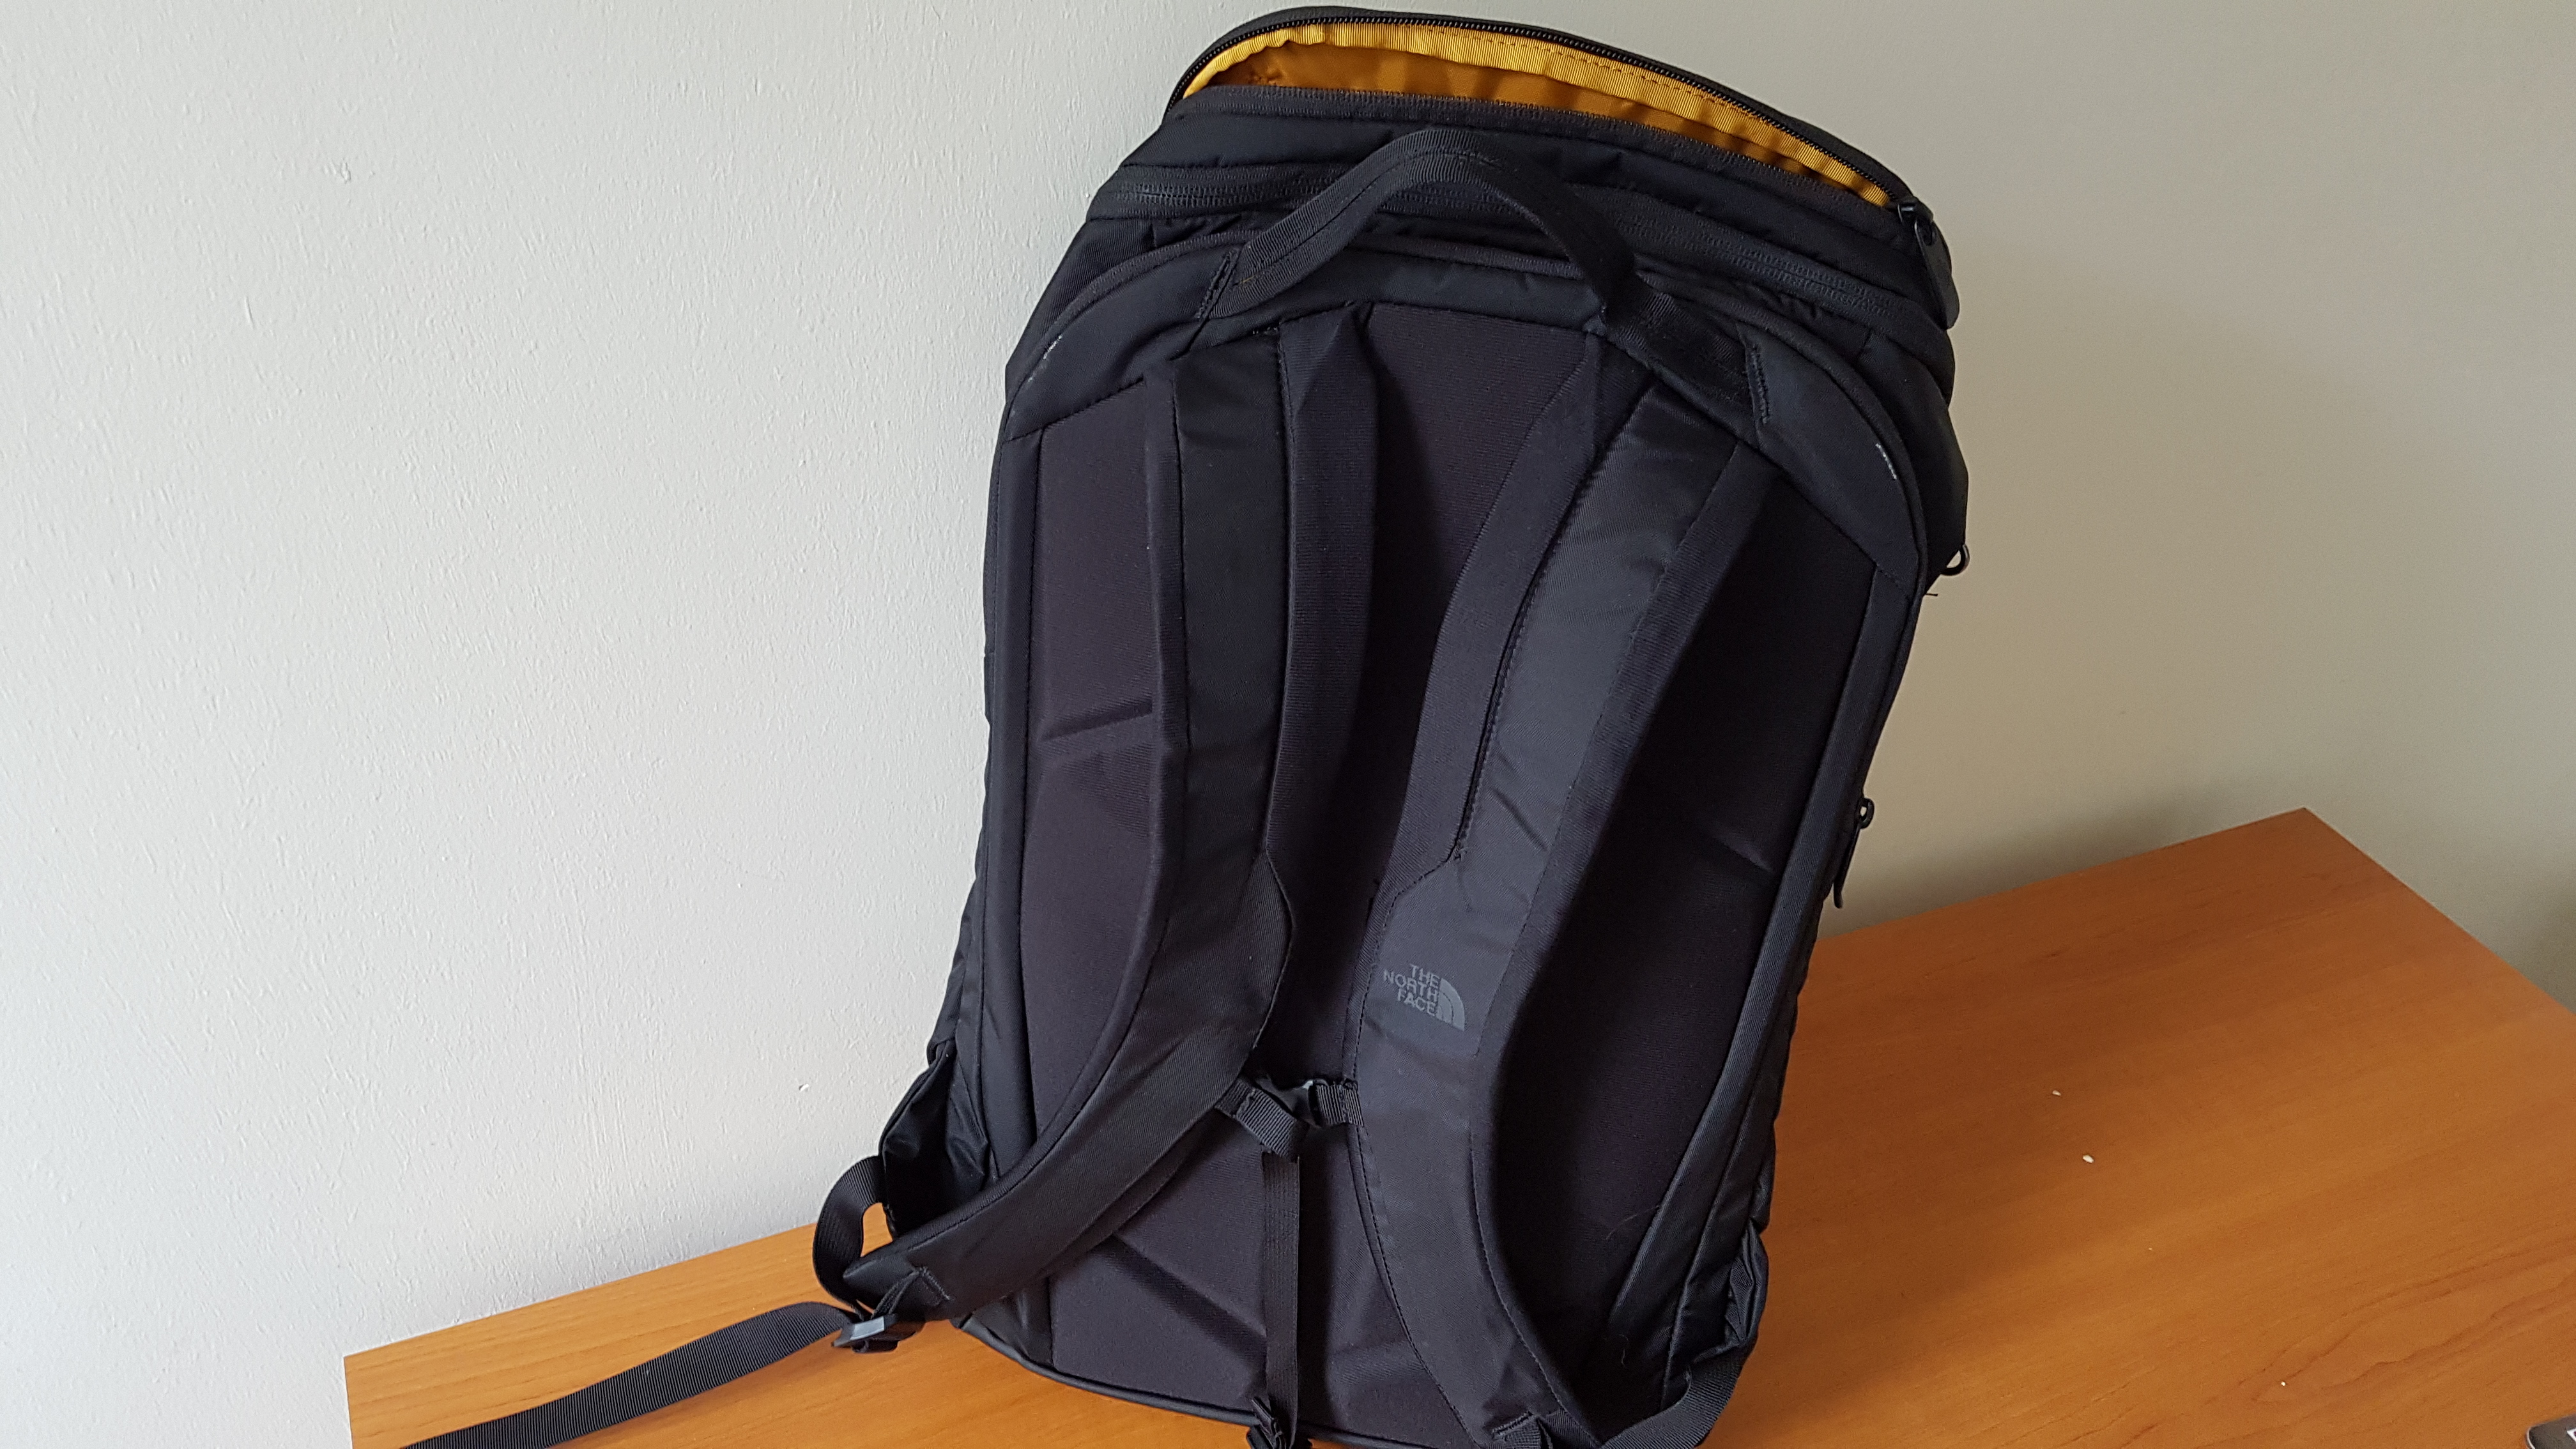 The North Face - Kaban – The Perfect Pack